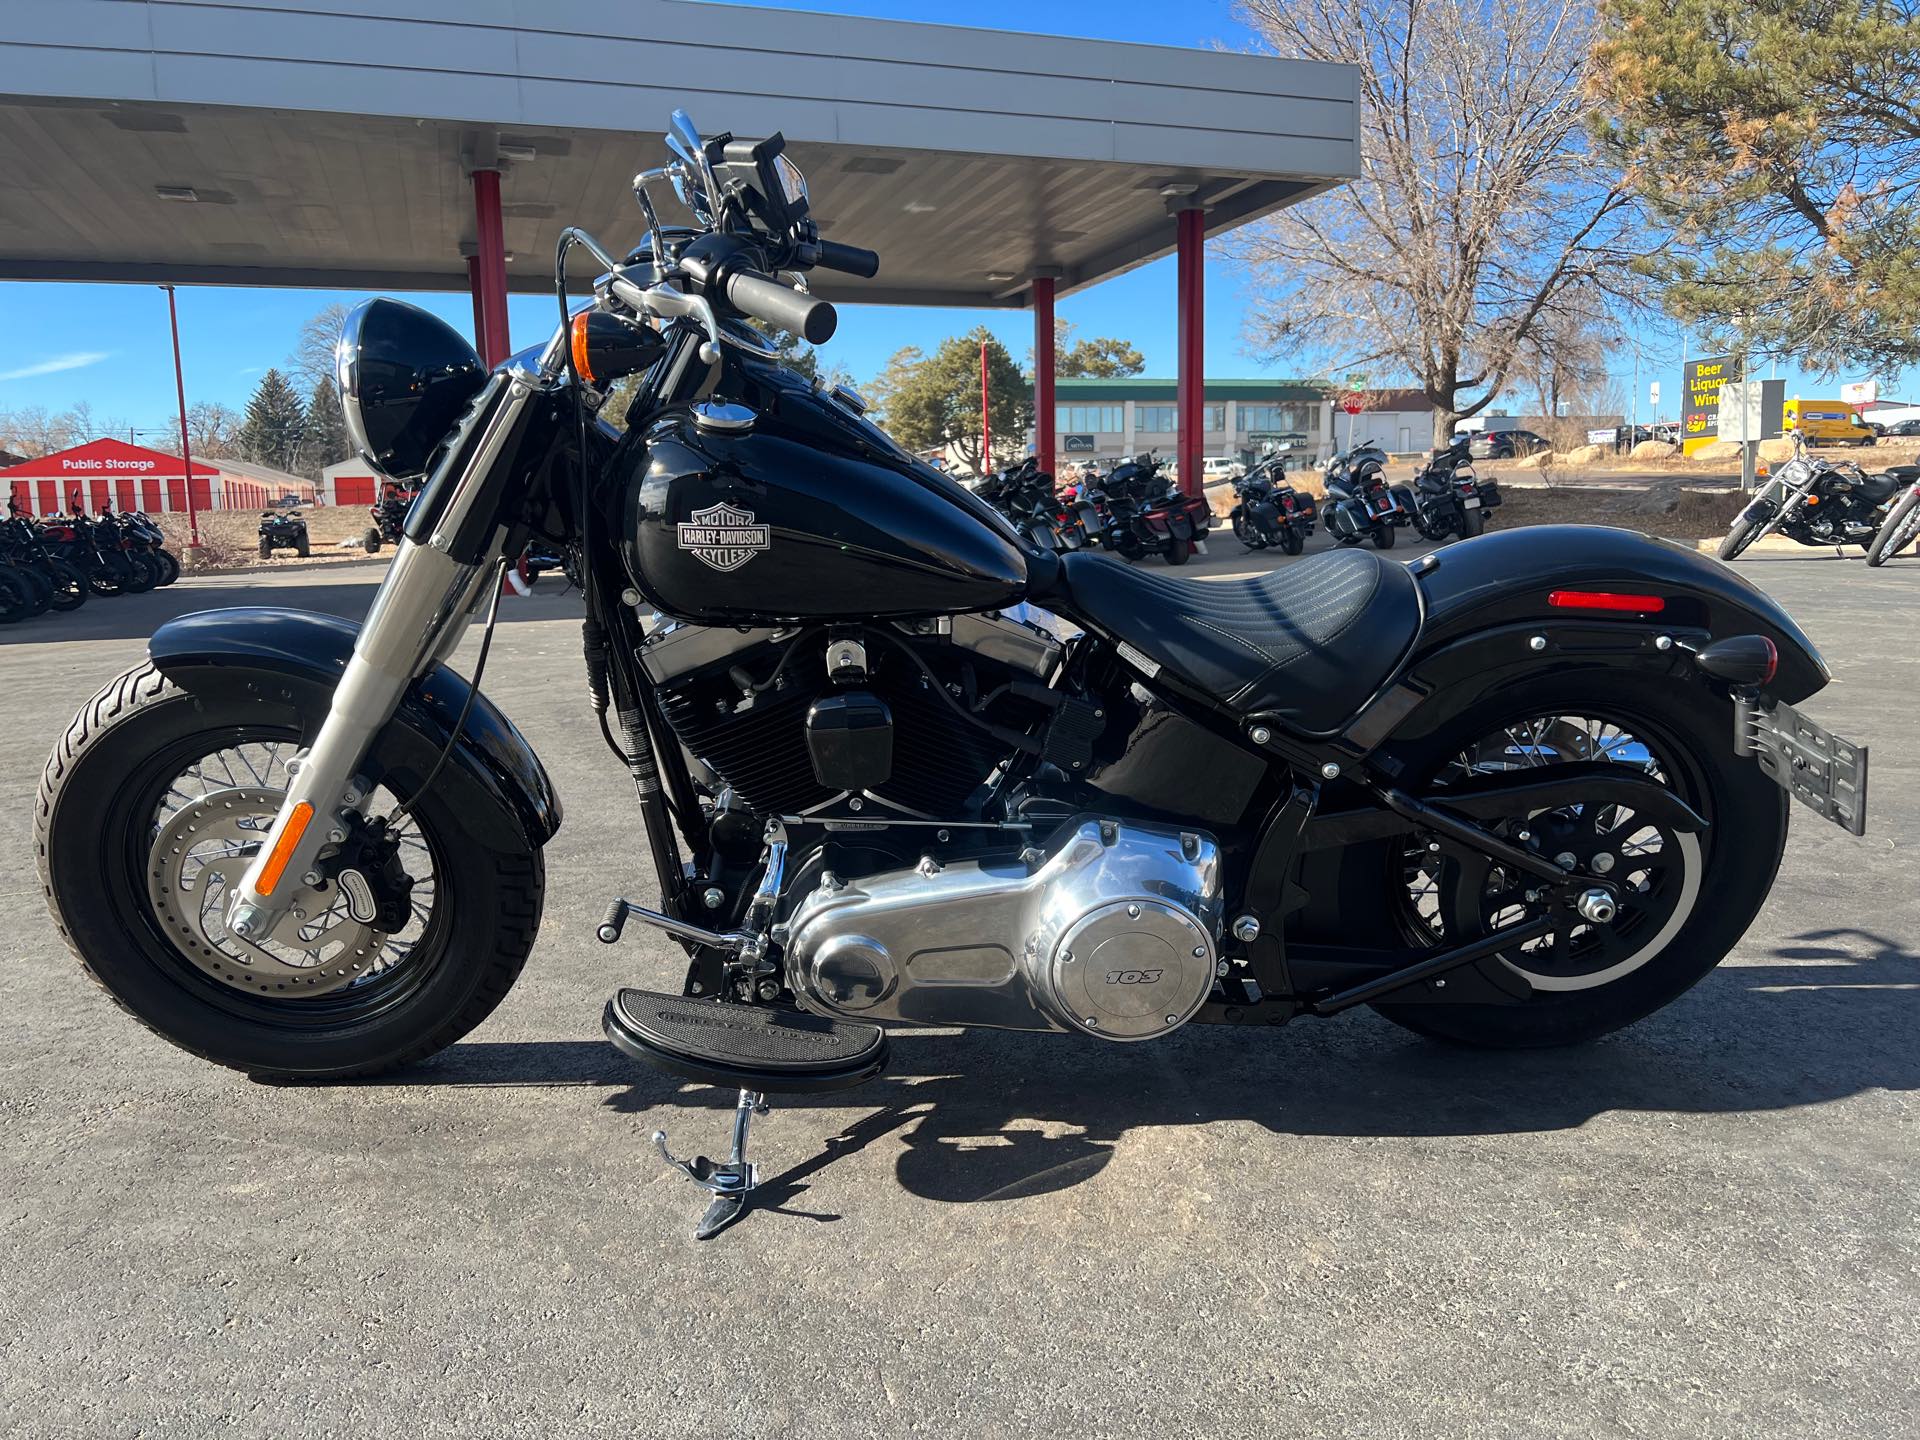 2017 Harley-Davidson Softail Slim at Aces Motorcycles - Fort Collins